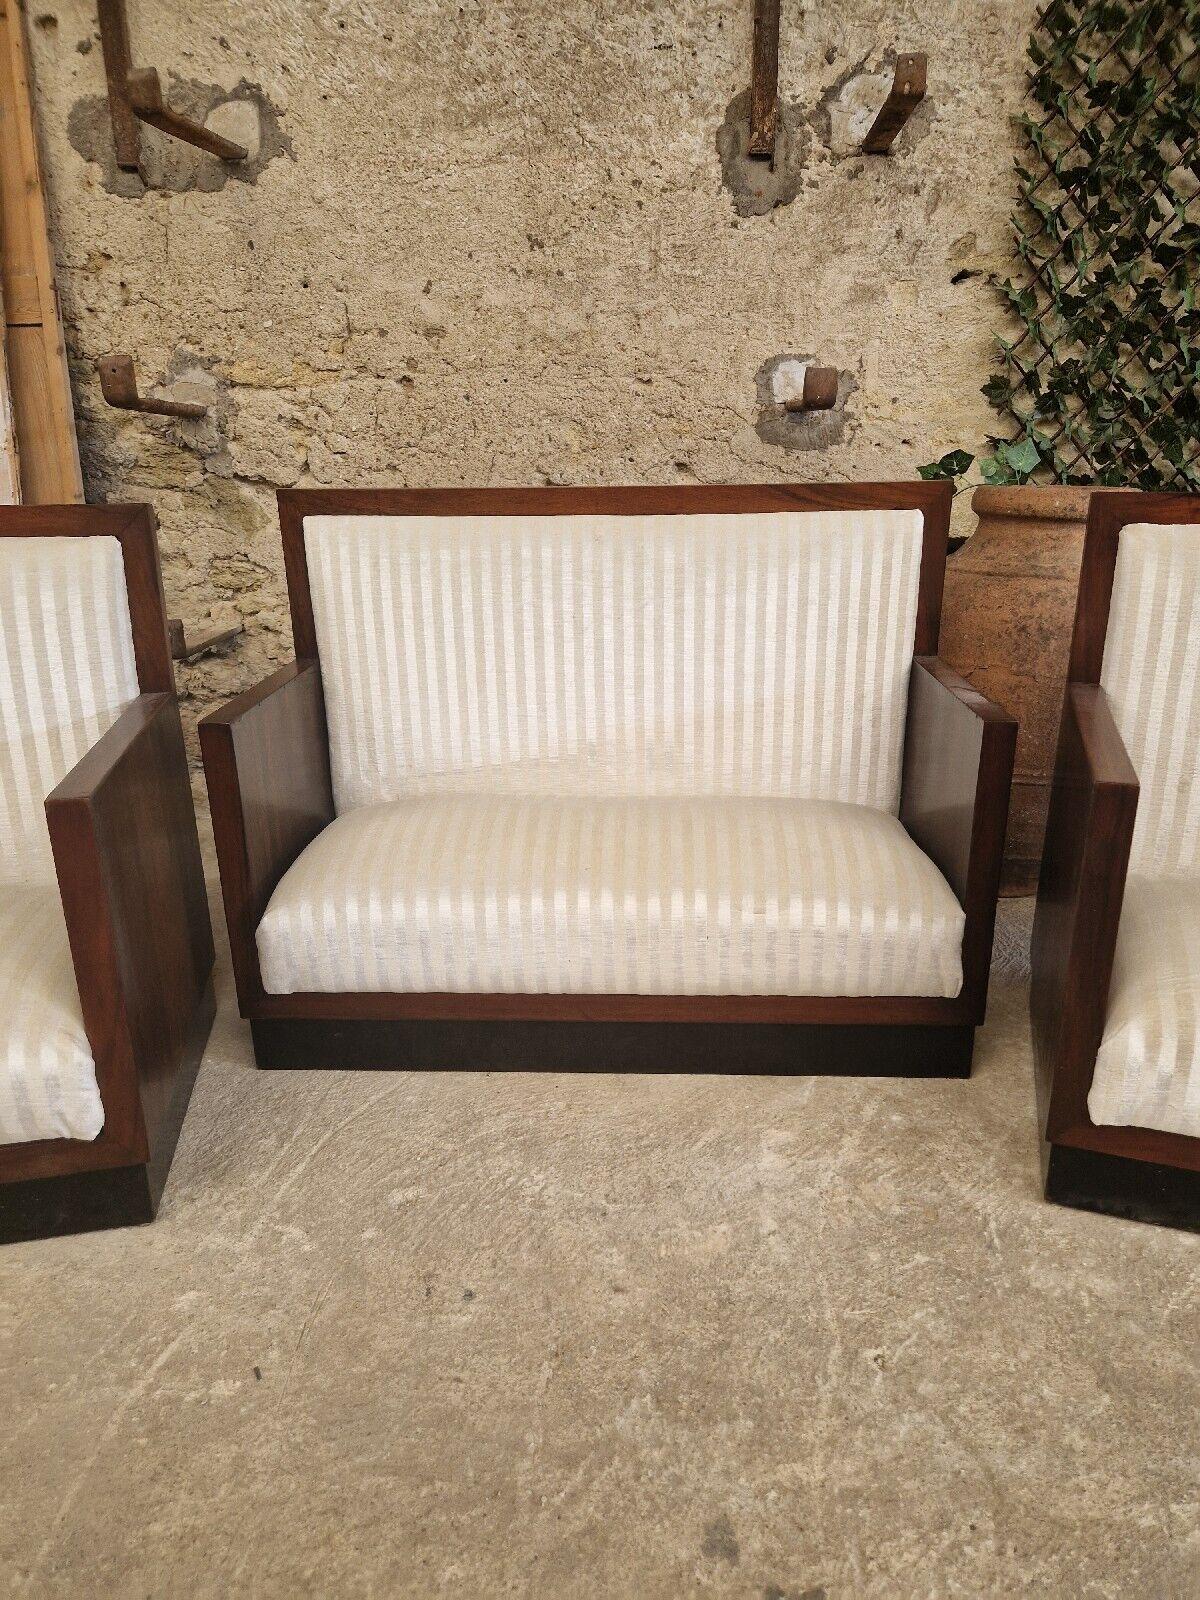 Vintage Art Deco Living Room Set Modular Modernist Style Sofa and Chairs In Good Condition For Sale In Buxton, GB